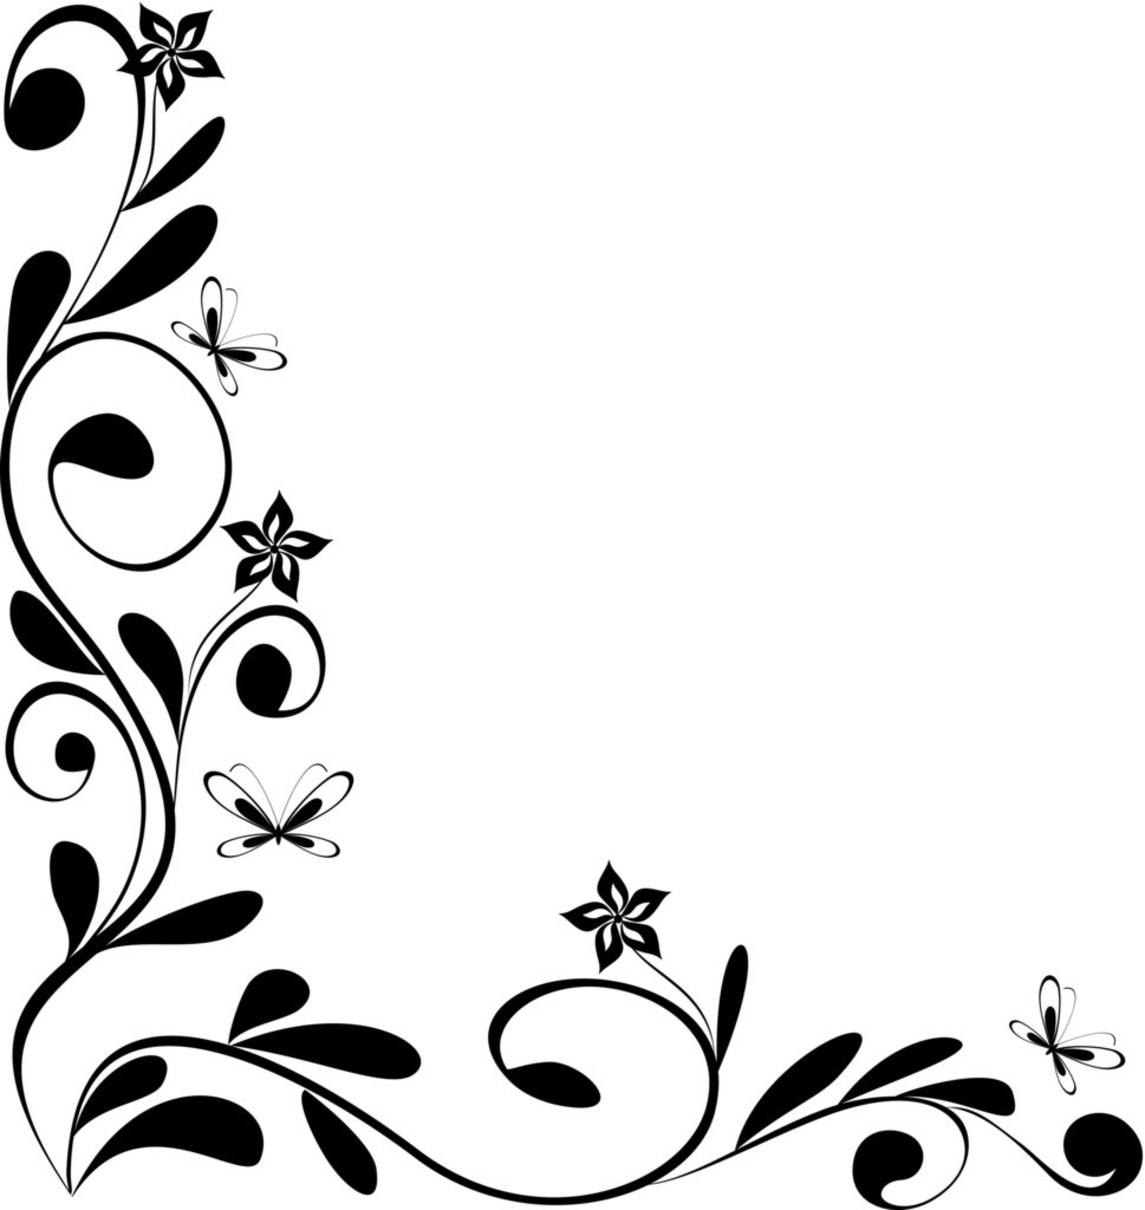 2 swirl corner clipart. Free cliparts that you can download to you computer and use in your designs.